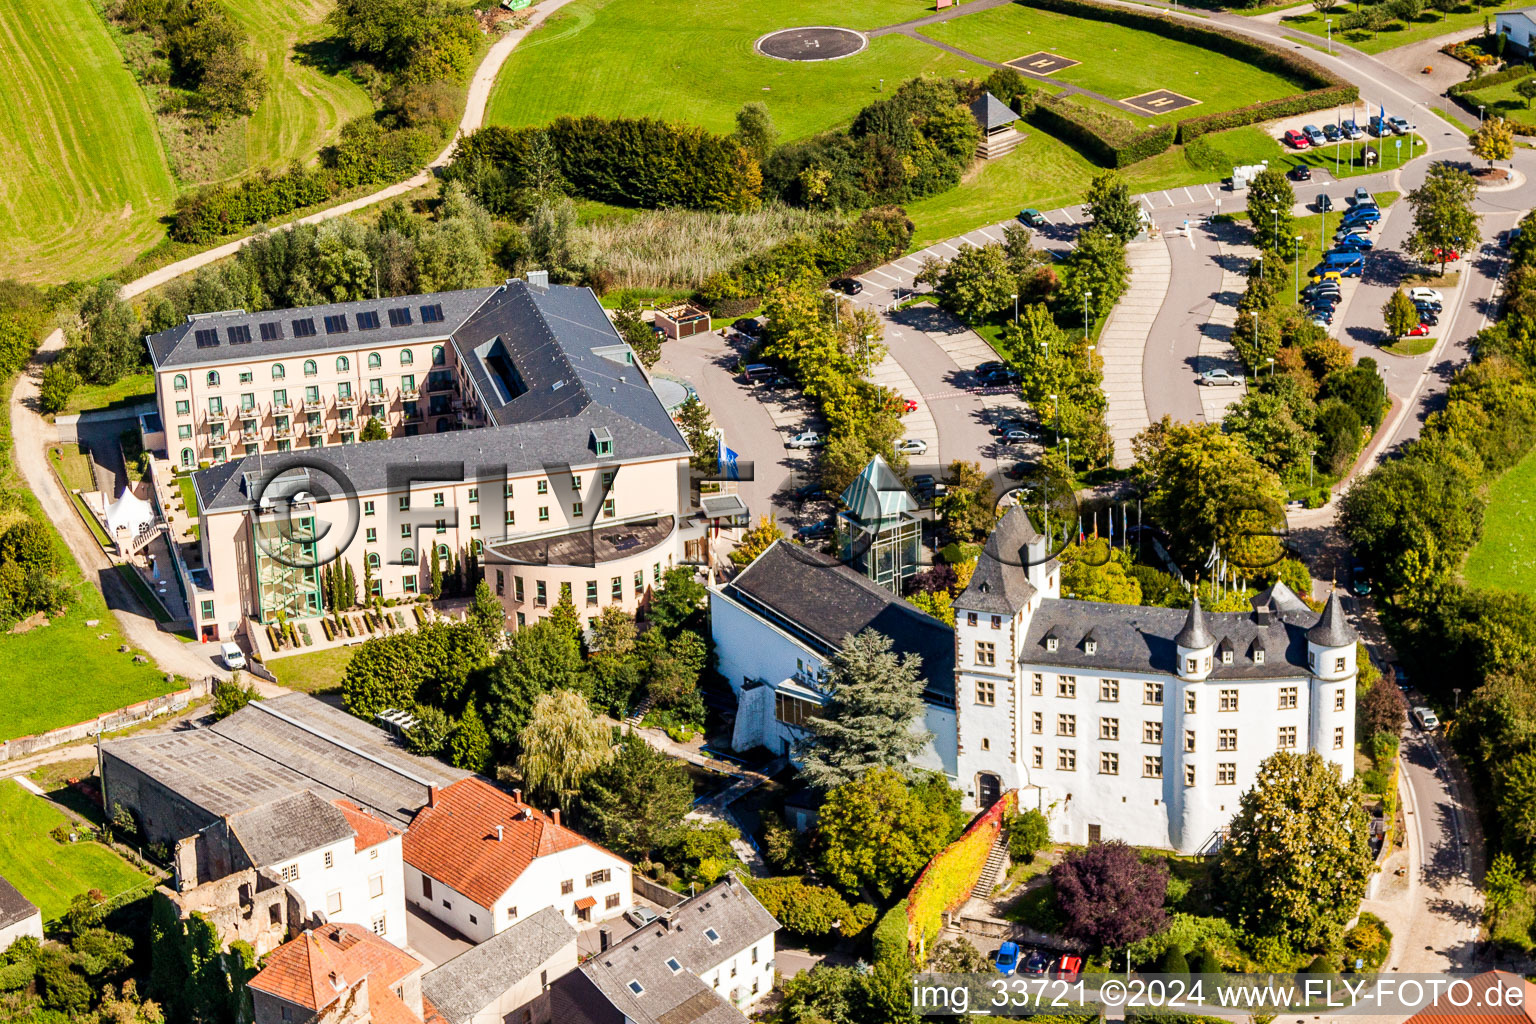 Oblique view of Complex of the hotel building Victor's Residenz-Hotel Schloss Berg and Niederburg Nennig in Perl in the state Saarland, Germany